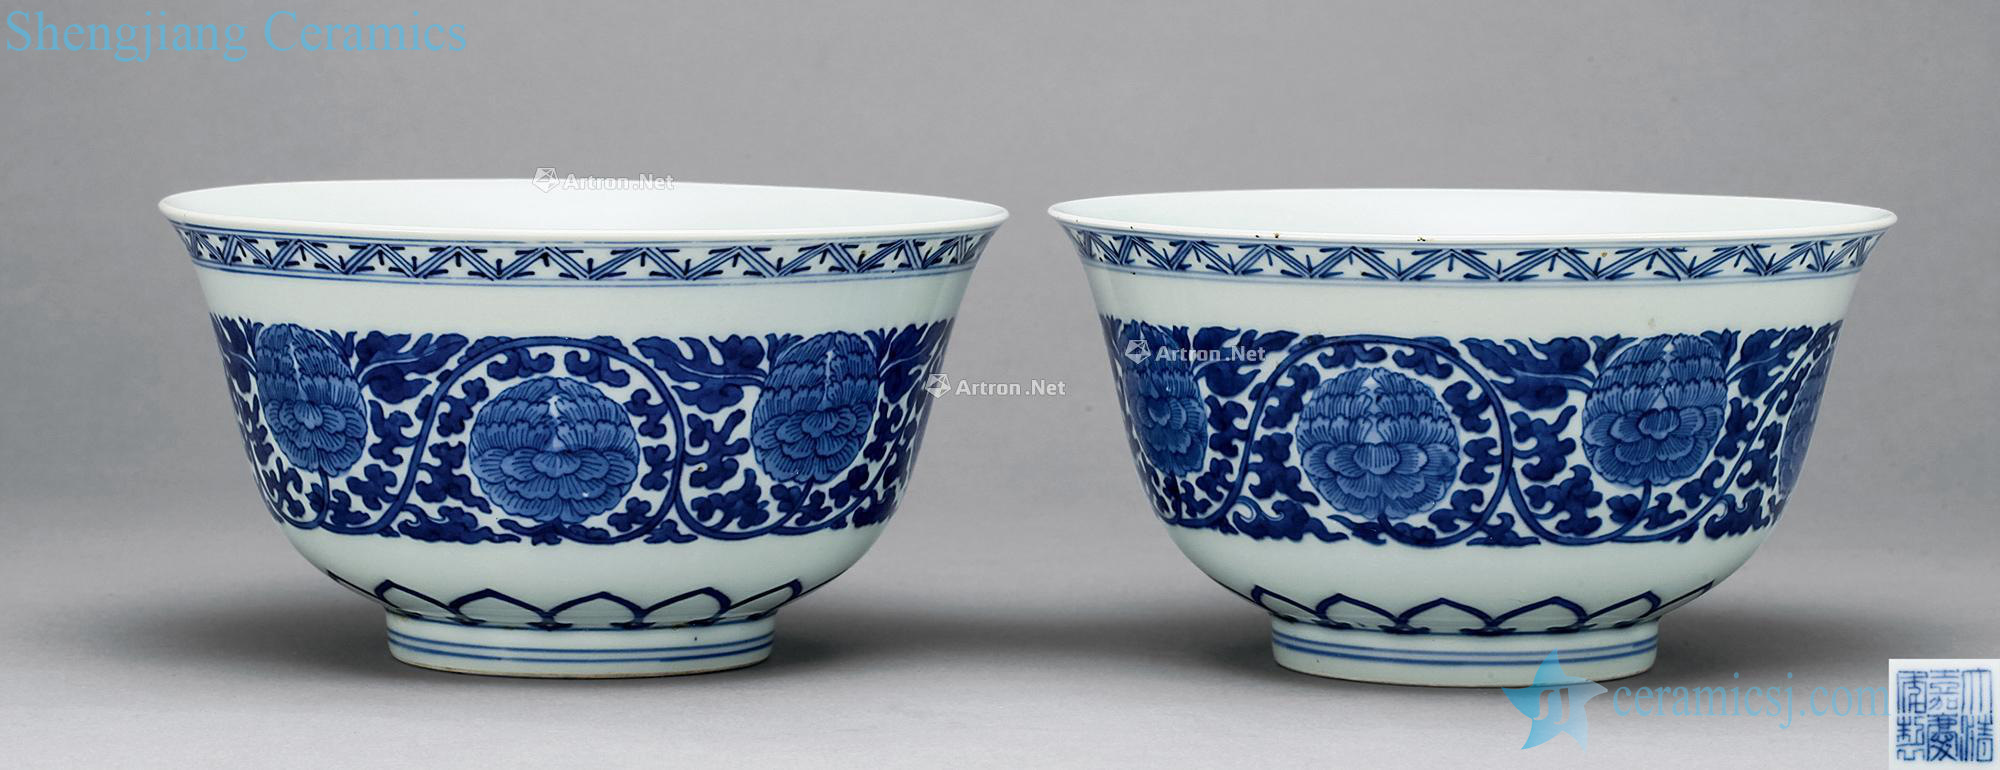 Qing jiaqing Blue and white flower bowls bound branches (2)